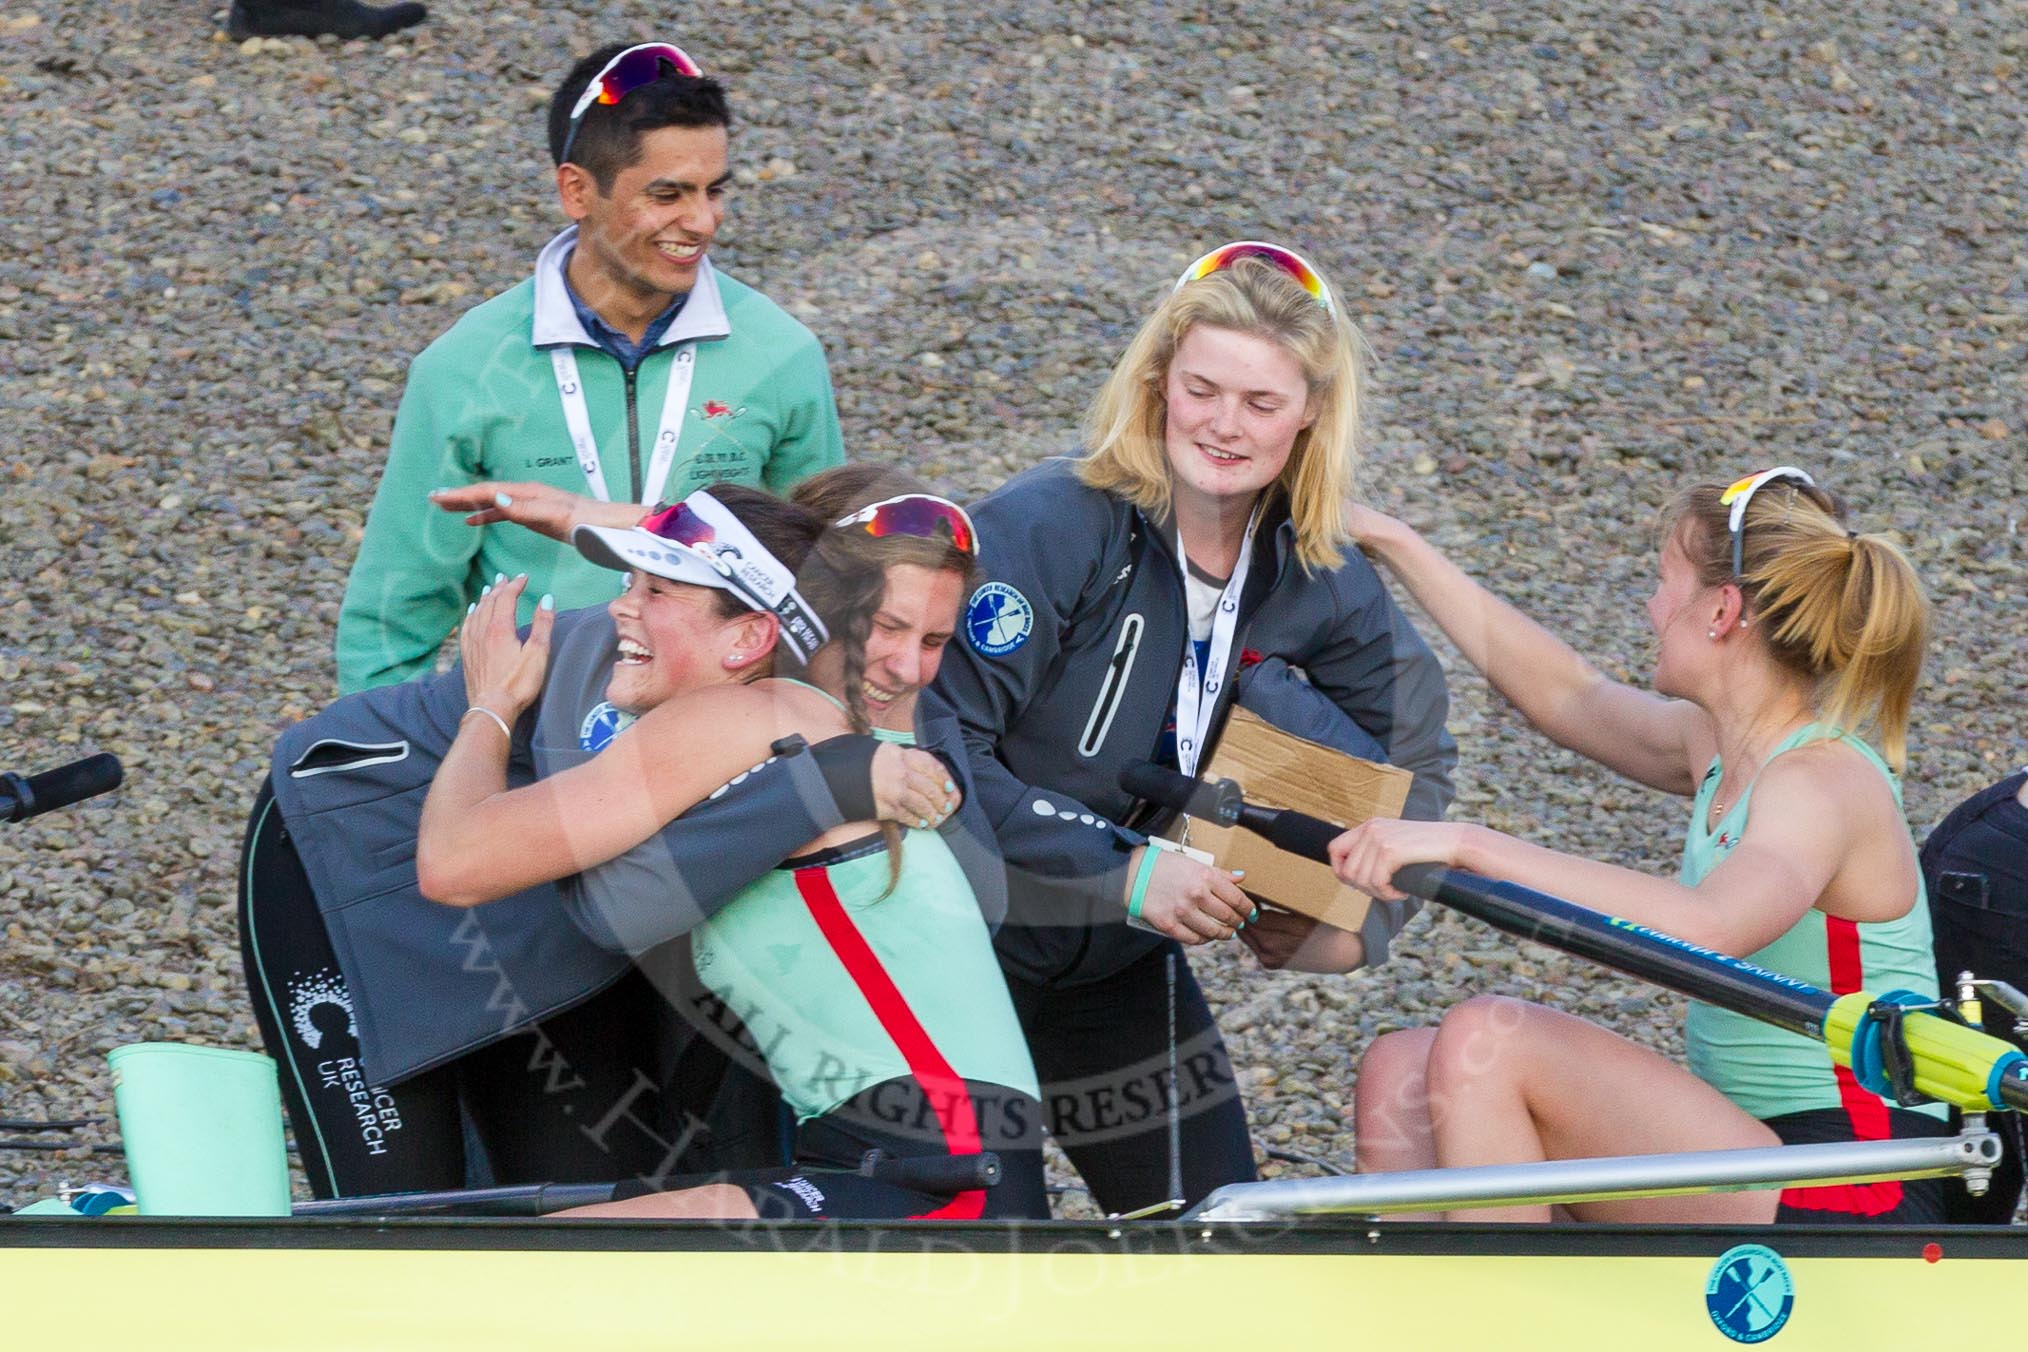 The Boat Race season 2017 -  The Cancer Research Women's Boat Race: CUWBC acelebrating after having won the Women's Boat Race.
River Thames between Putney Bridge and Mortlake,
London SW15,

United Kingdom,
on 02 April 2017 at 16:58, image #198